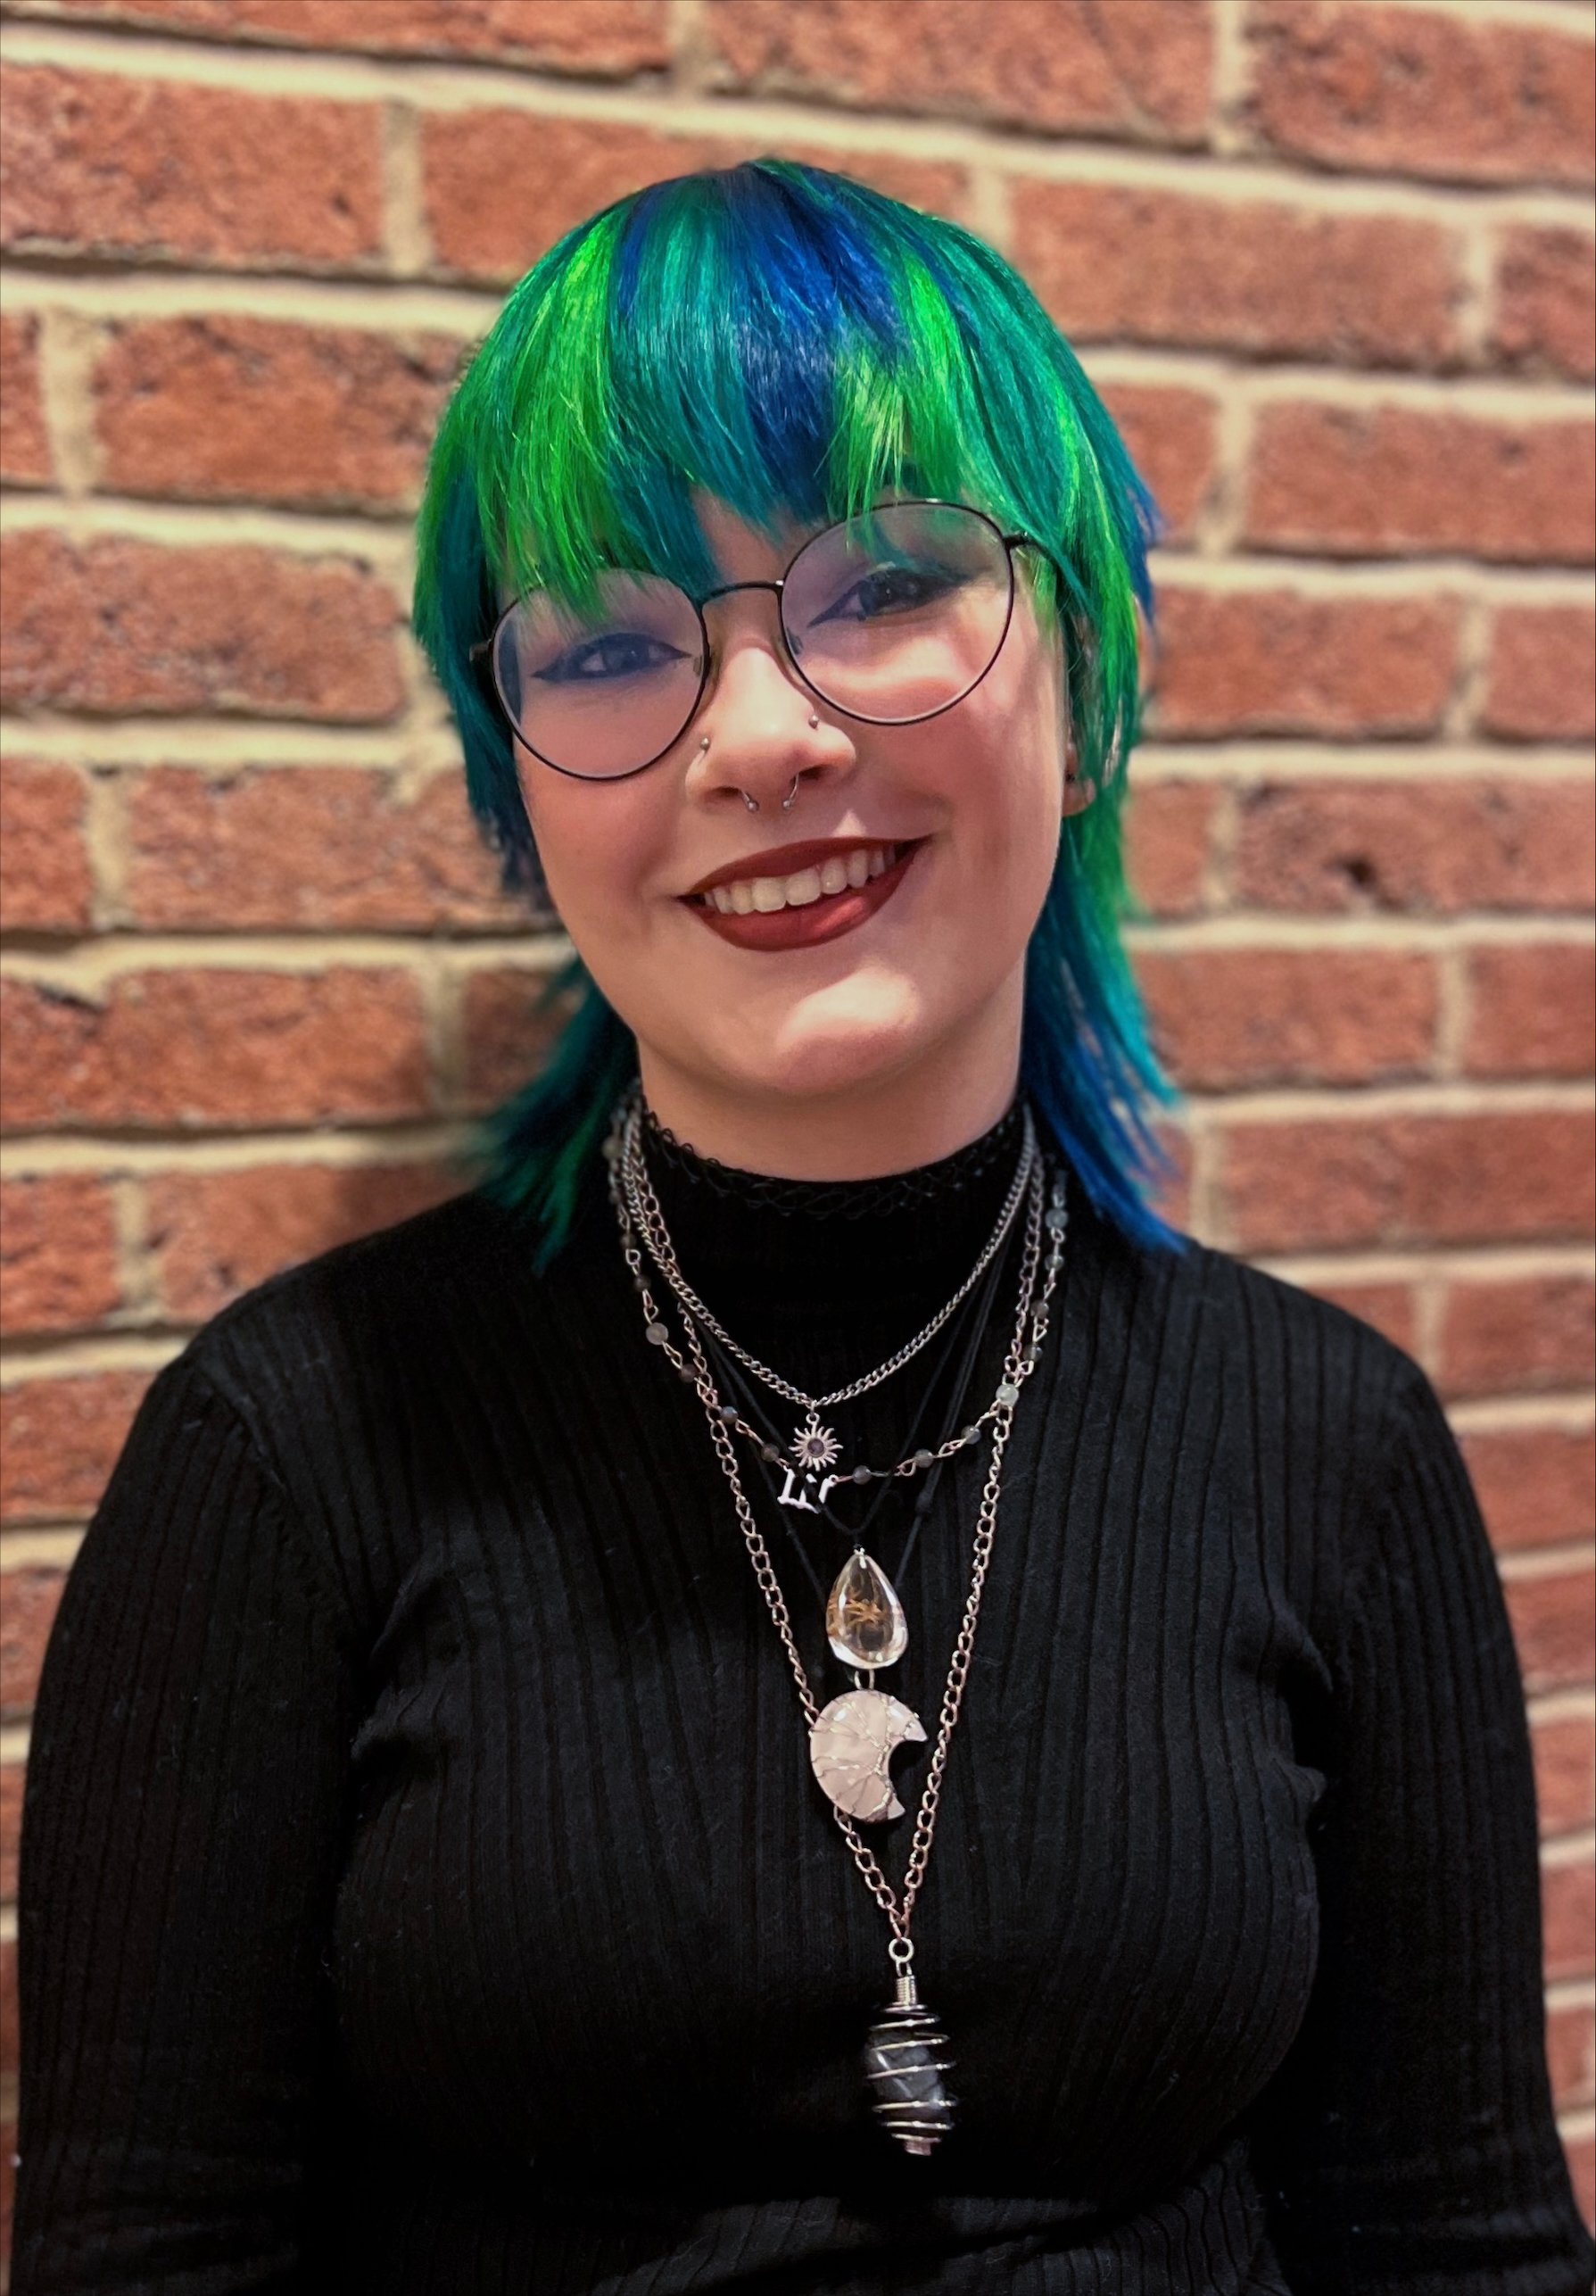 A person with green and blue hair and a black top